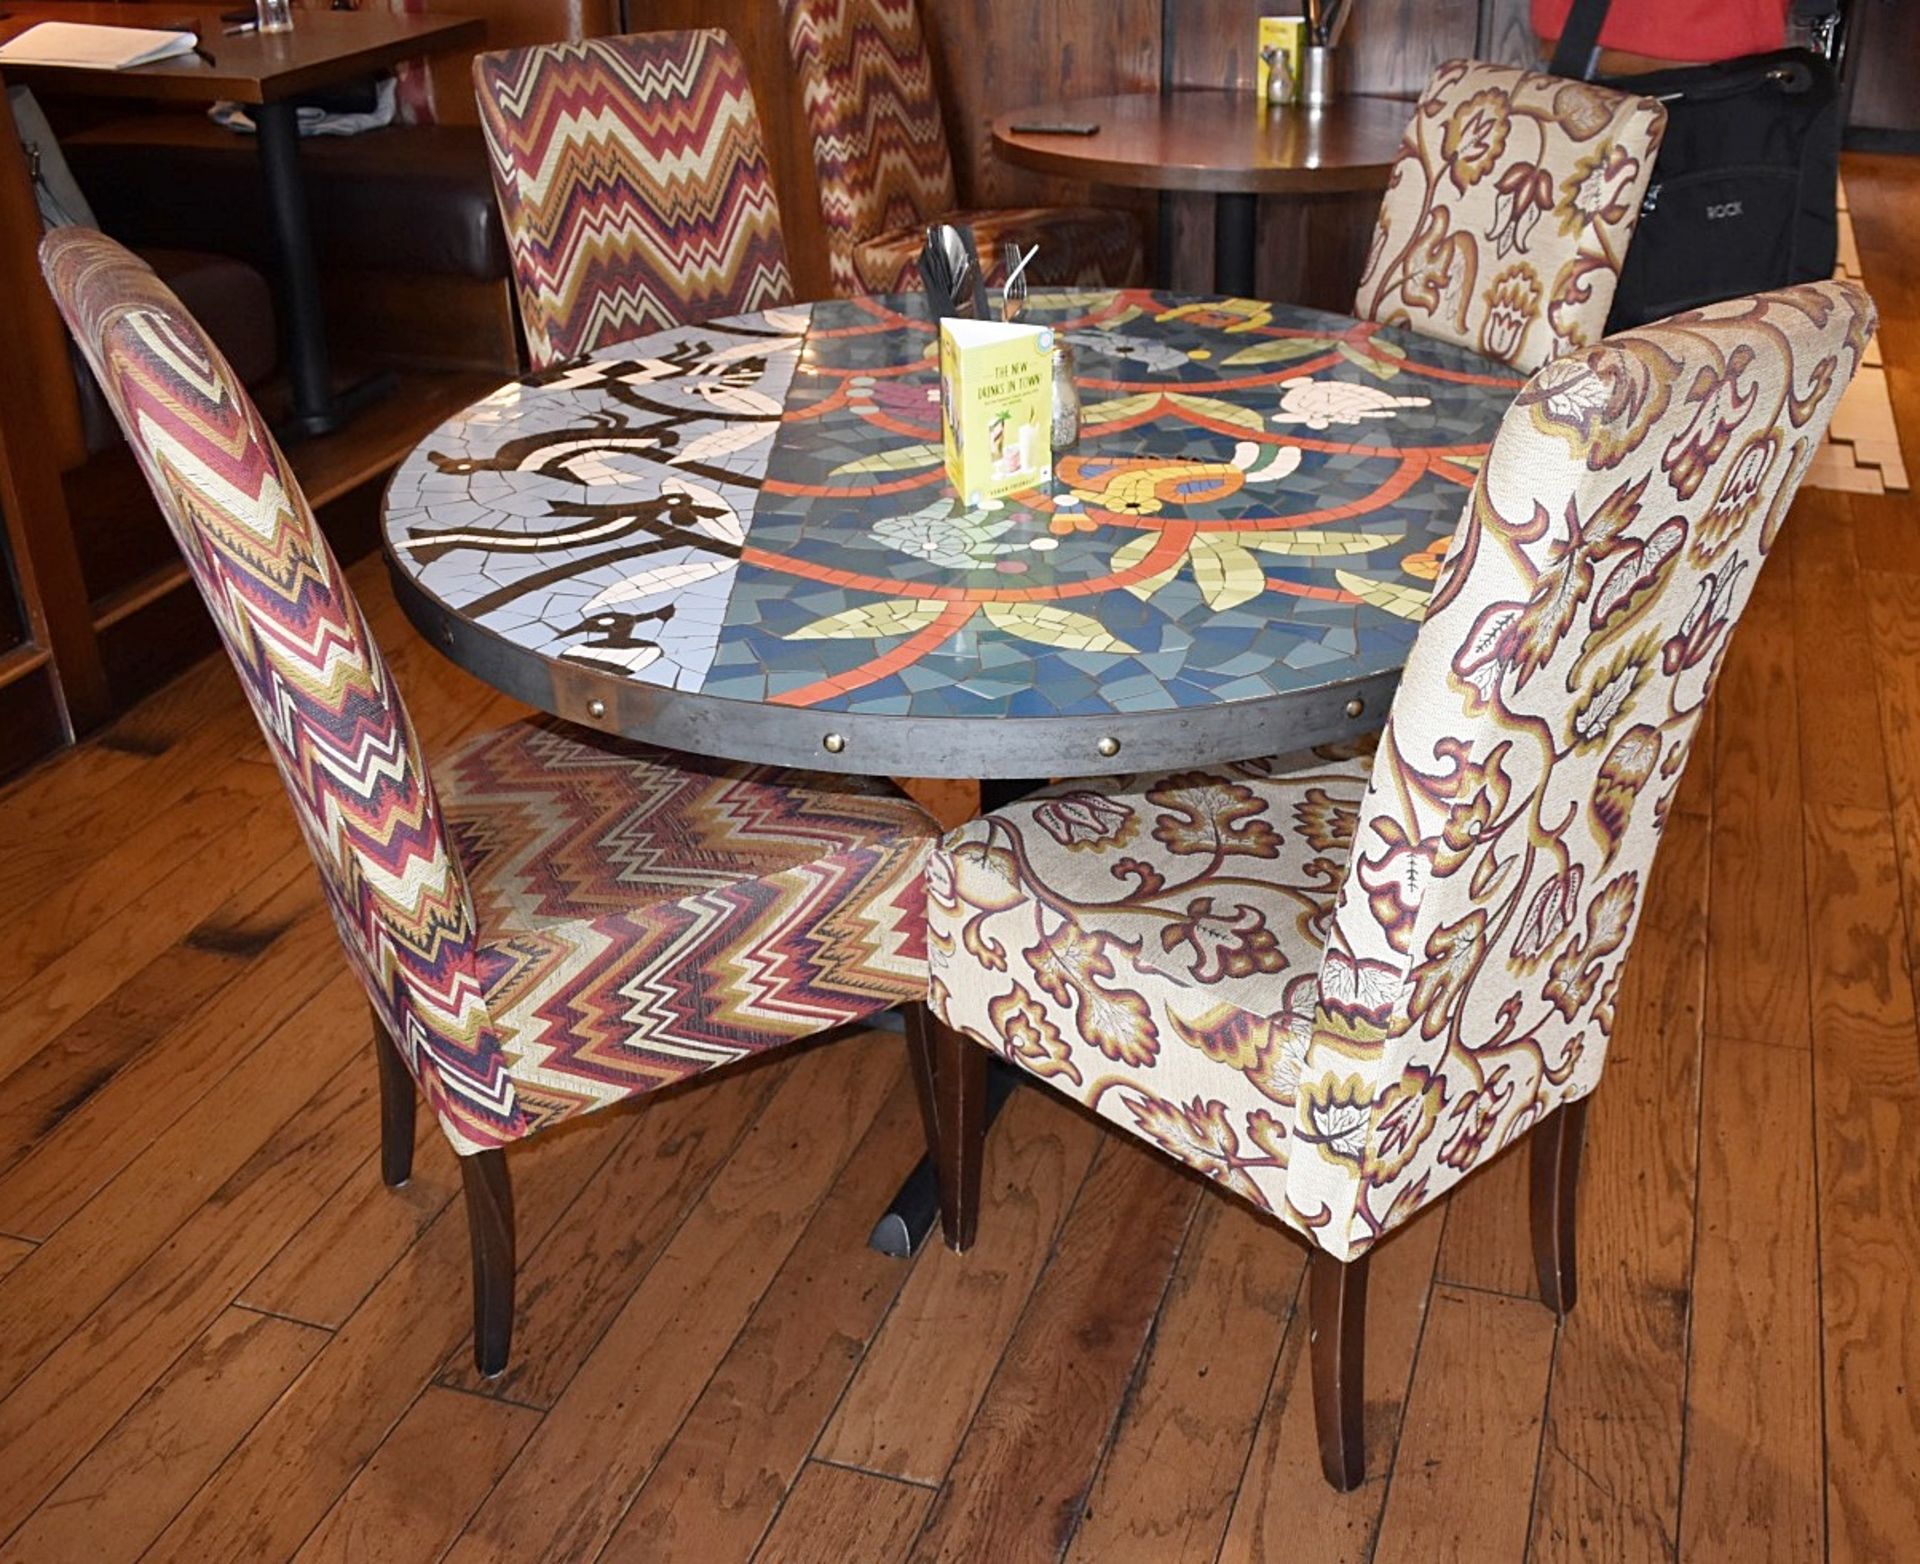 6 x Upholstered Restaurant Dining Chairs In A Floral Mexican-style Fabric - H95 x 40 x 40cm - Image 3 of 4